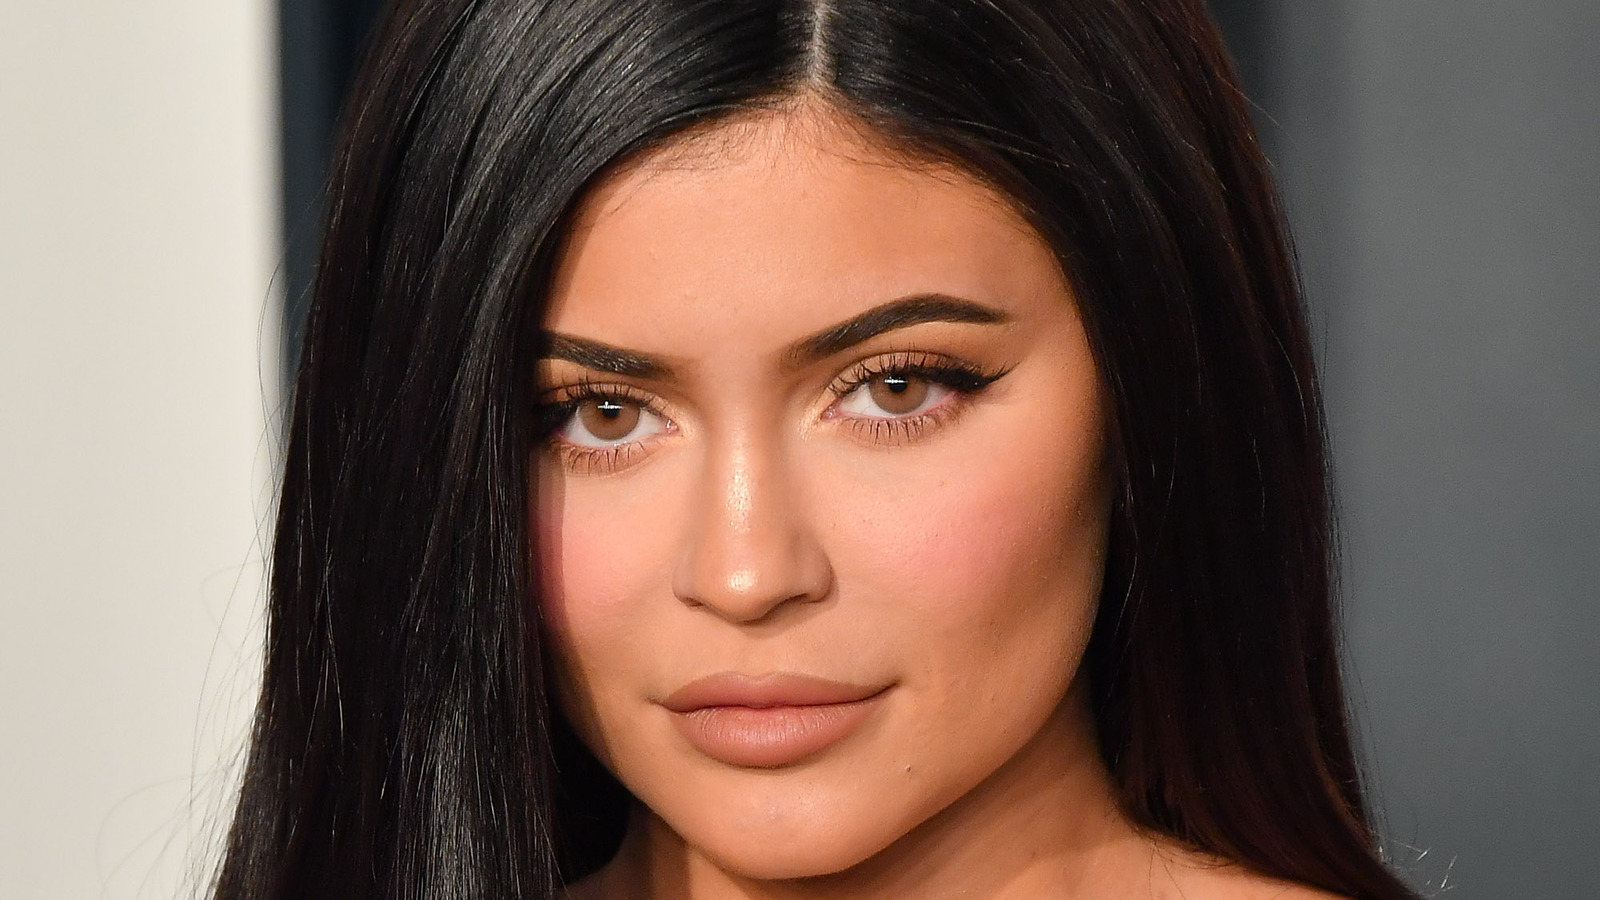 Kylie Jenner’s Jewelry Choices Hint at Marriage Once Again